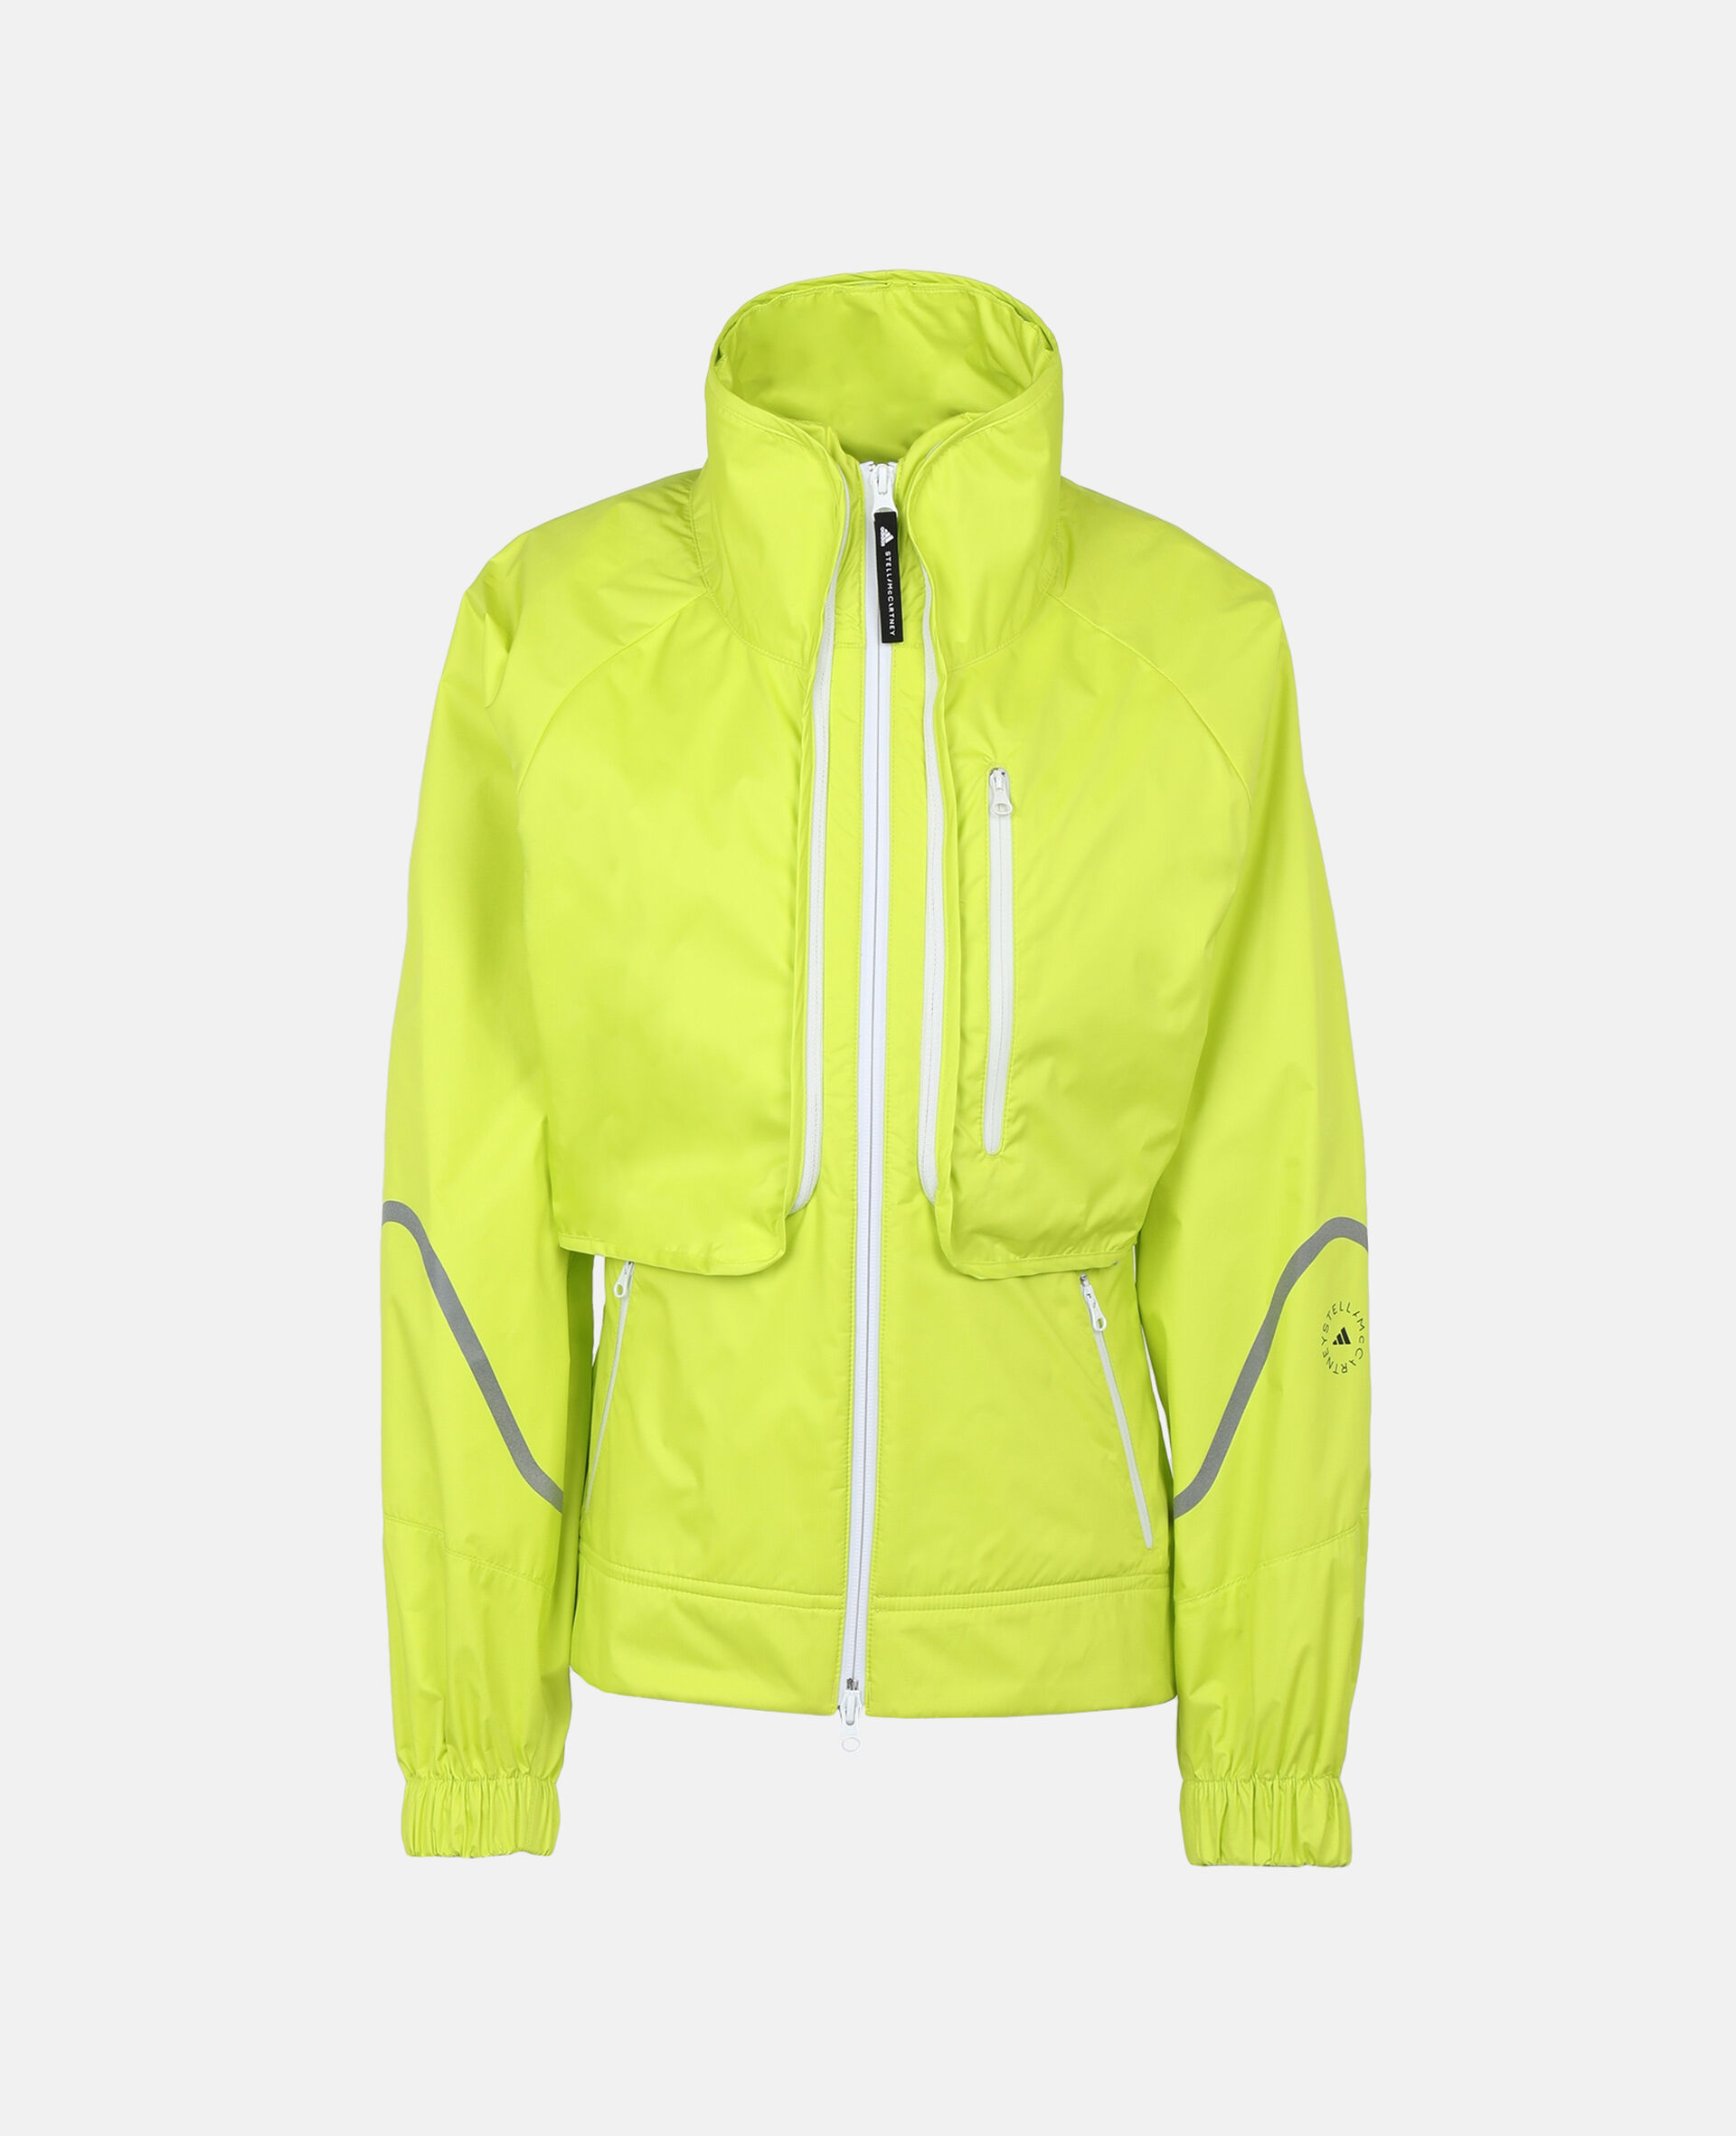 TruePace 2-in-1 Running Jacket-Yellow-large image number 0